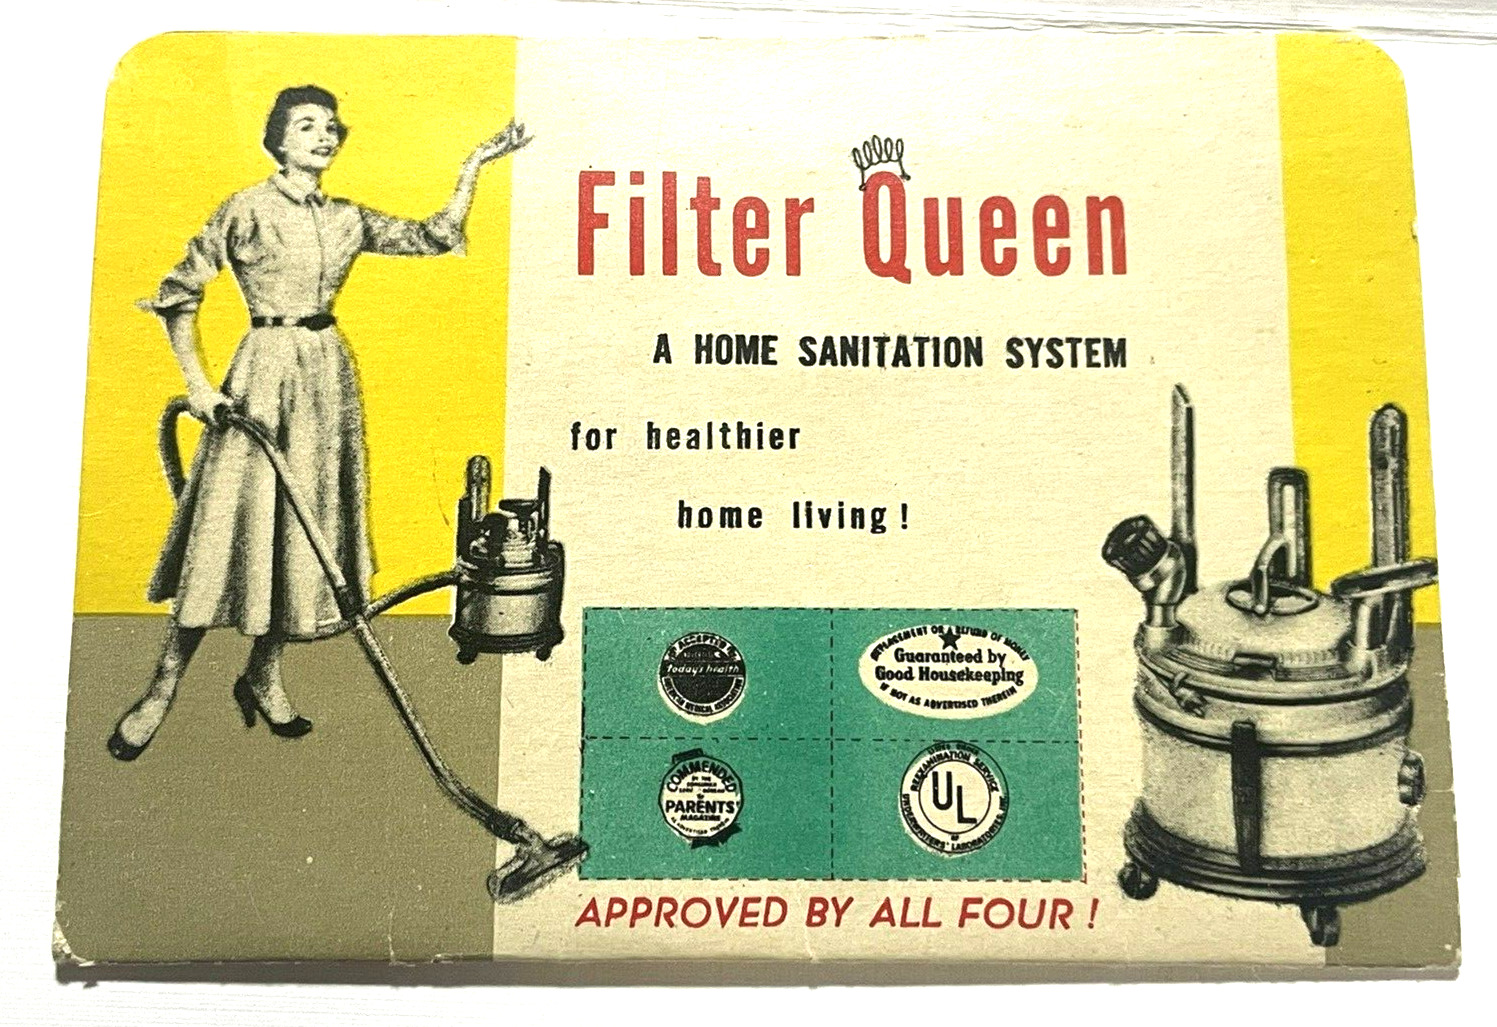 Filter Queen Home Sanitation Sewing Advertising Needle Book c.1950s